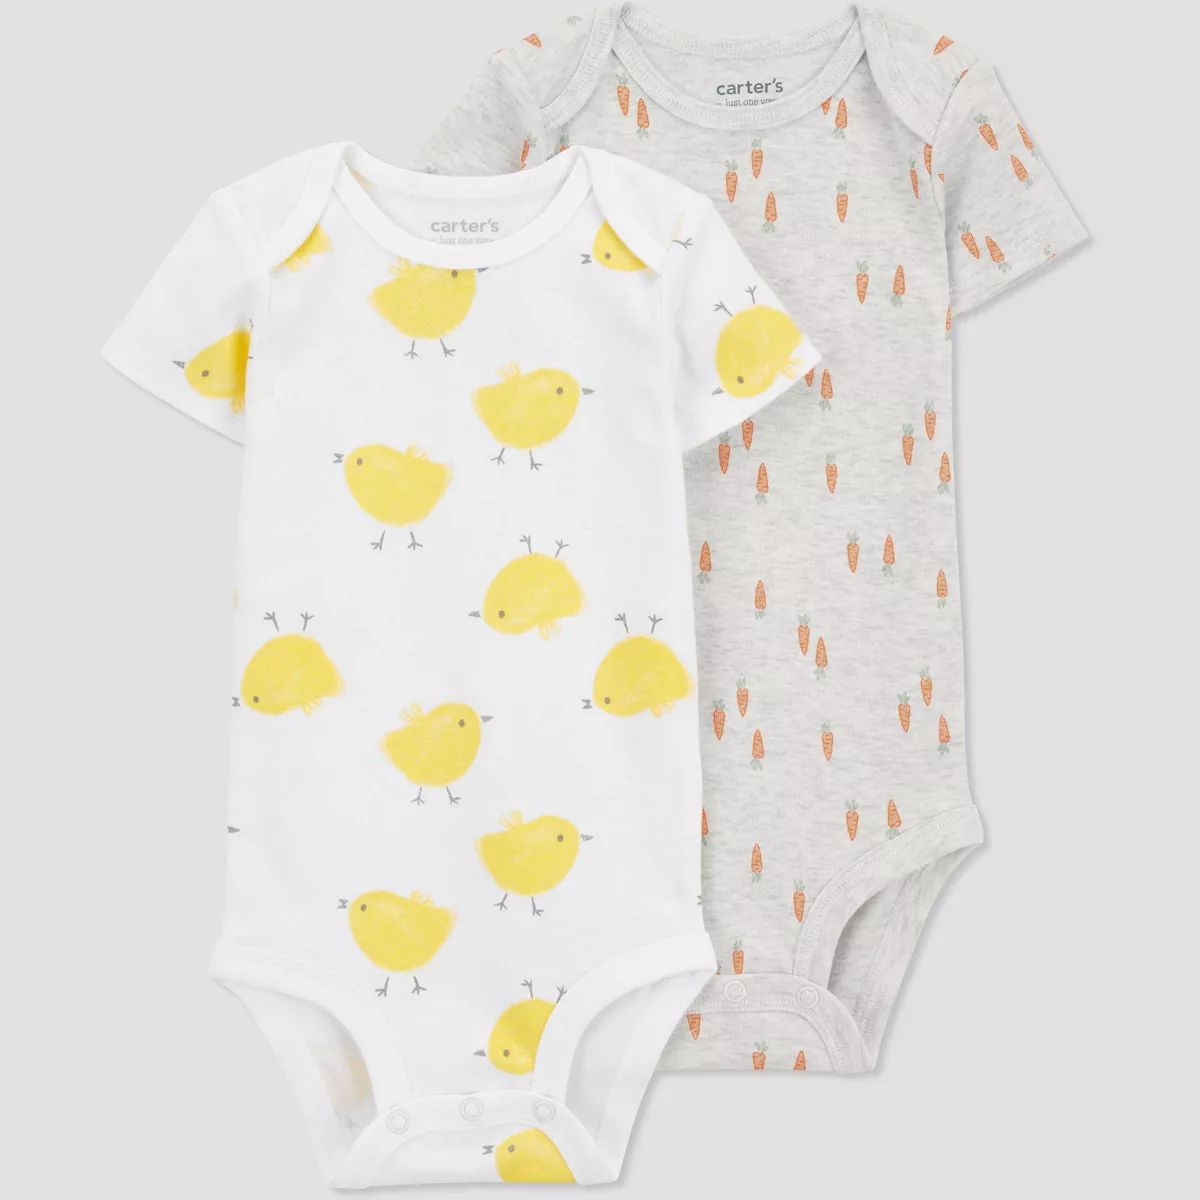 Carter's Just One You® Baby 2pk Easter End Cap Farm & Carrot Bodysuit - Gray/Orange/Yellow | Target